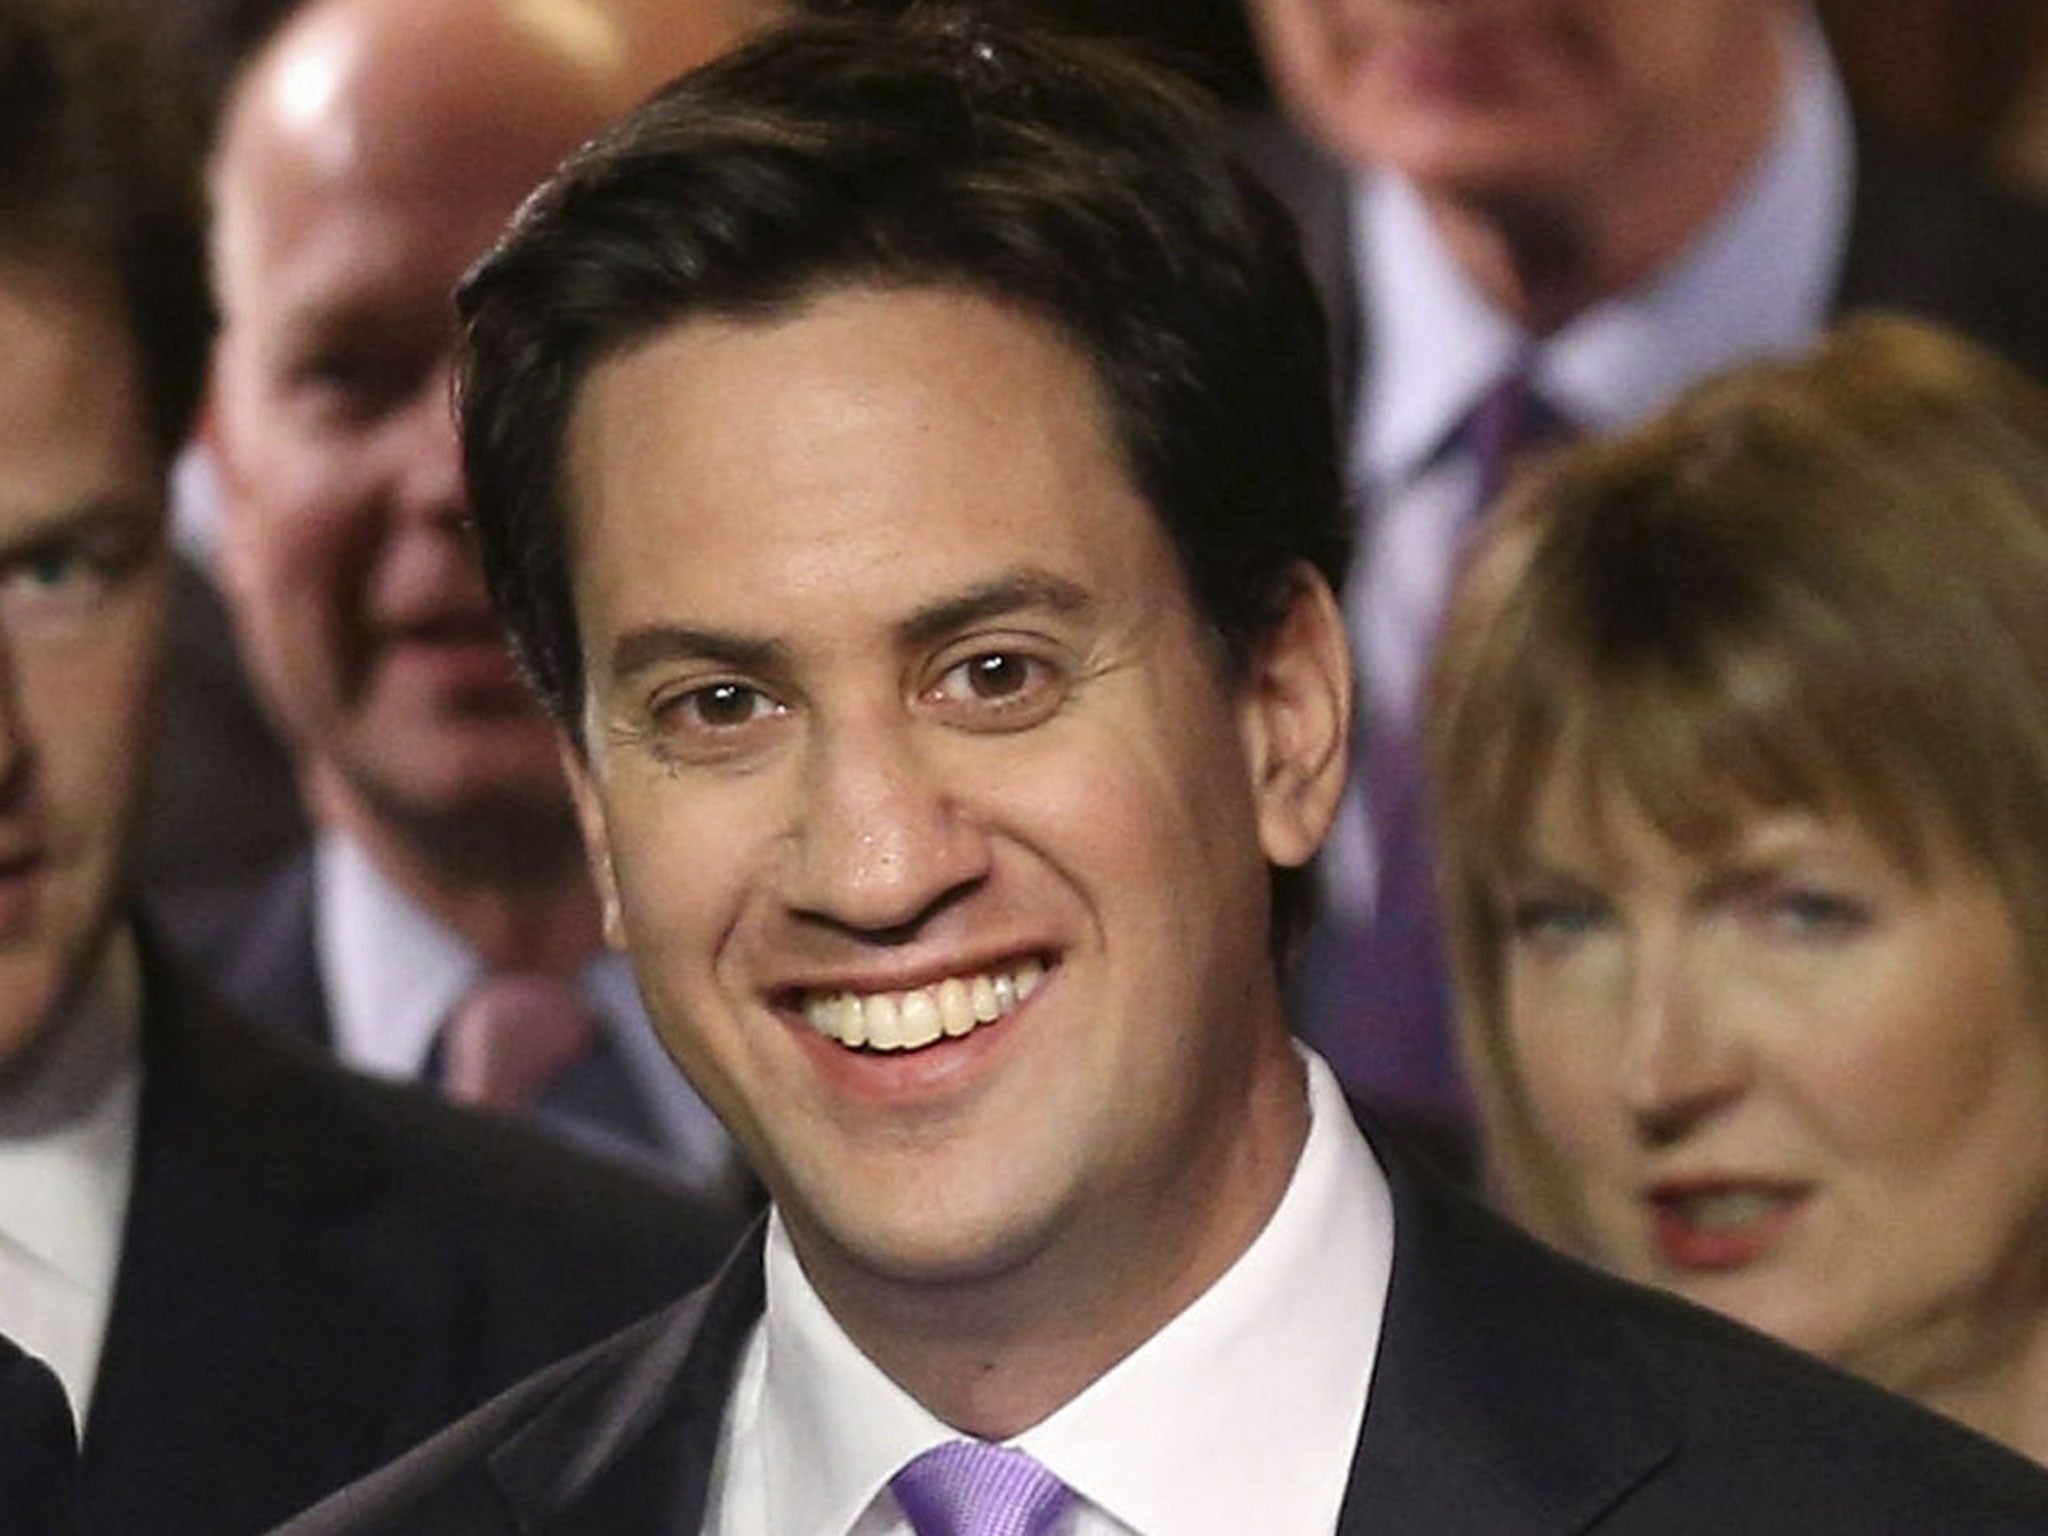 A senior Labour MP has urged Ed Miliband to start preparing now for a possible coalition with the Liberal Democrats